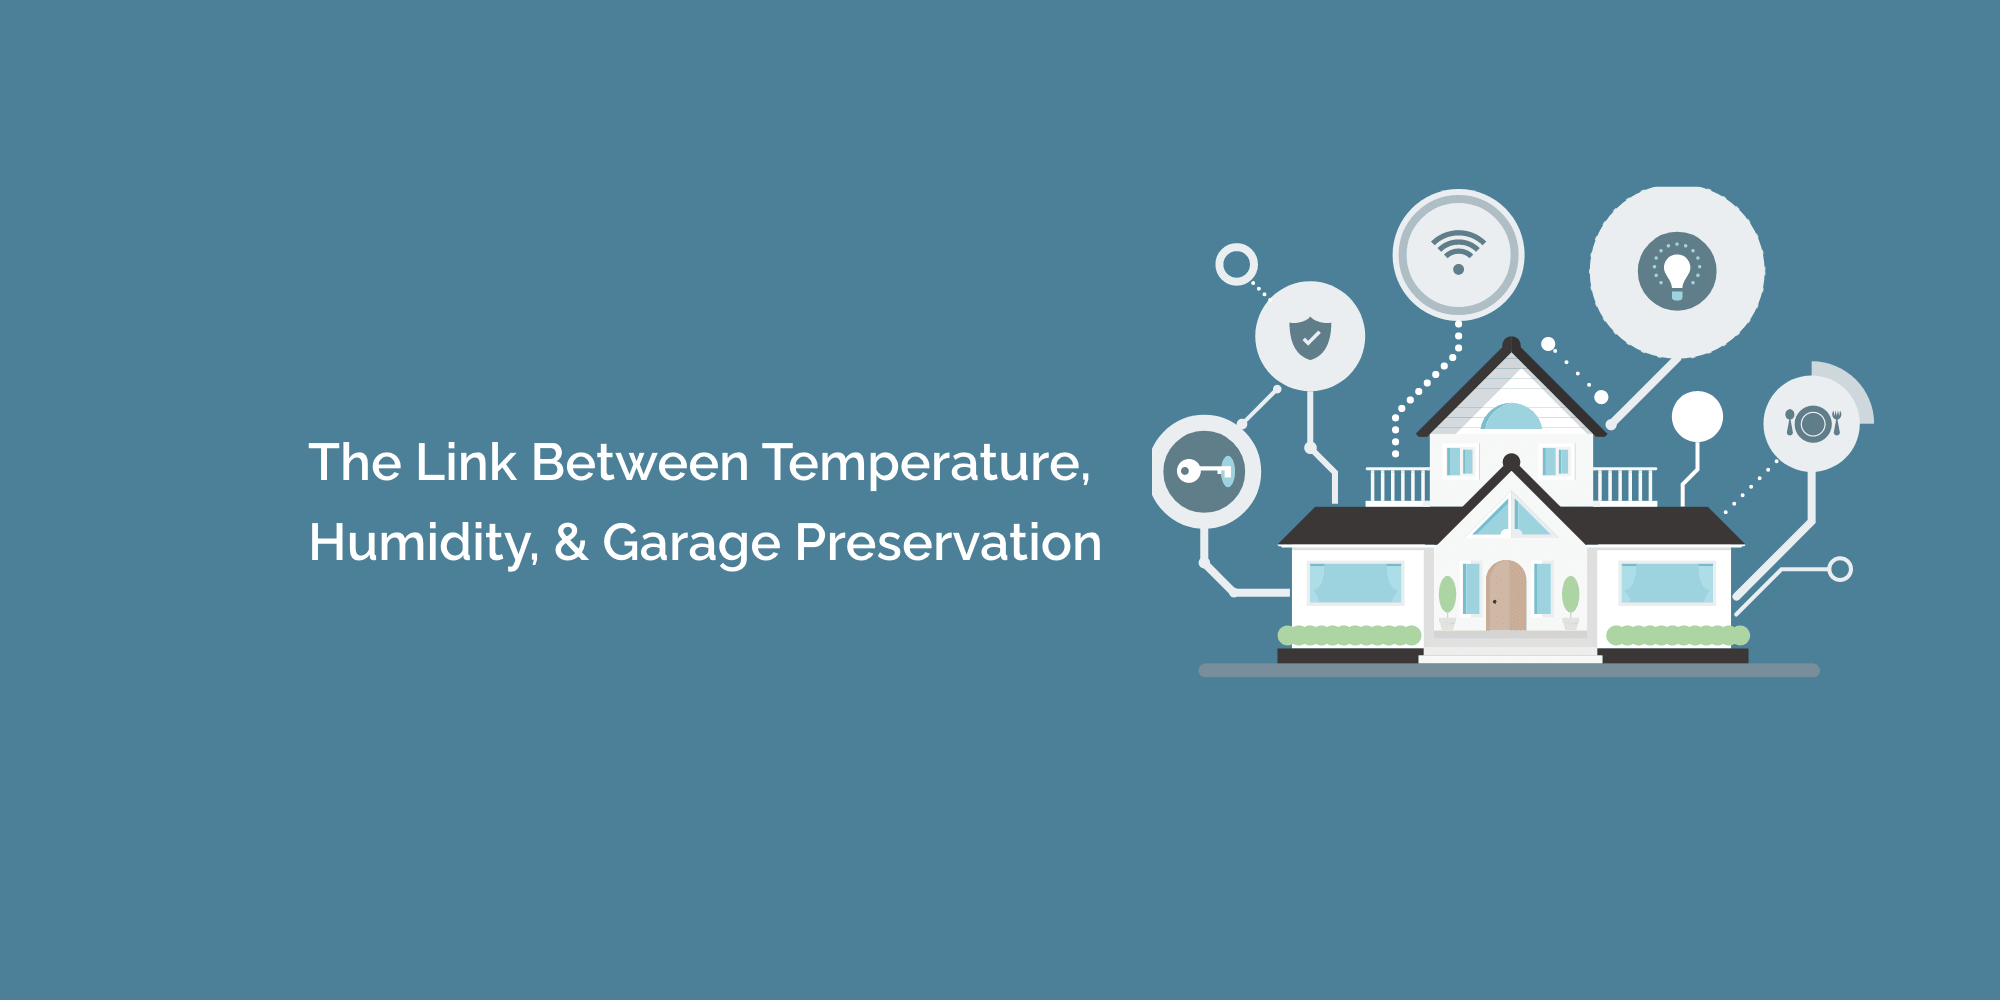 The Link Between Temperature, Humidity, and Garage Preservation